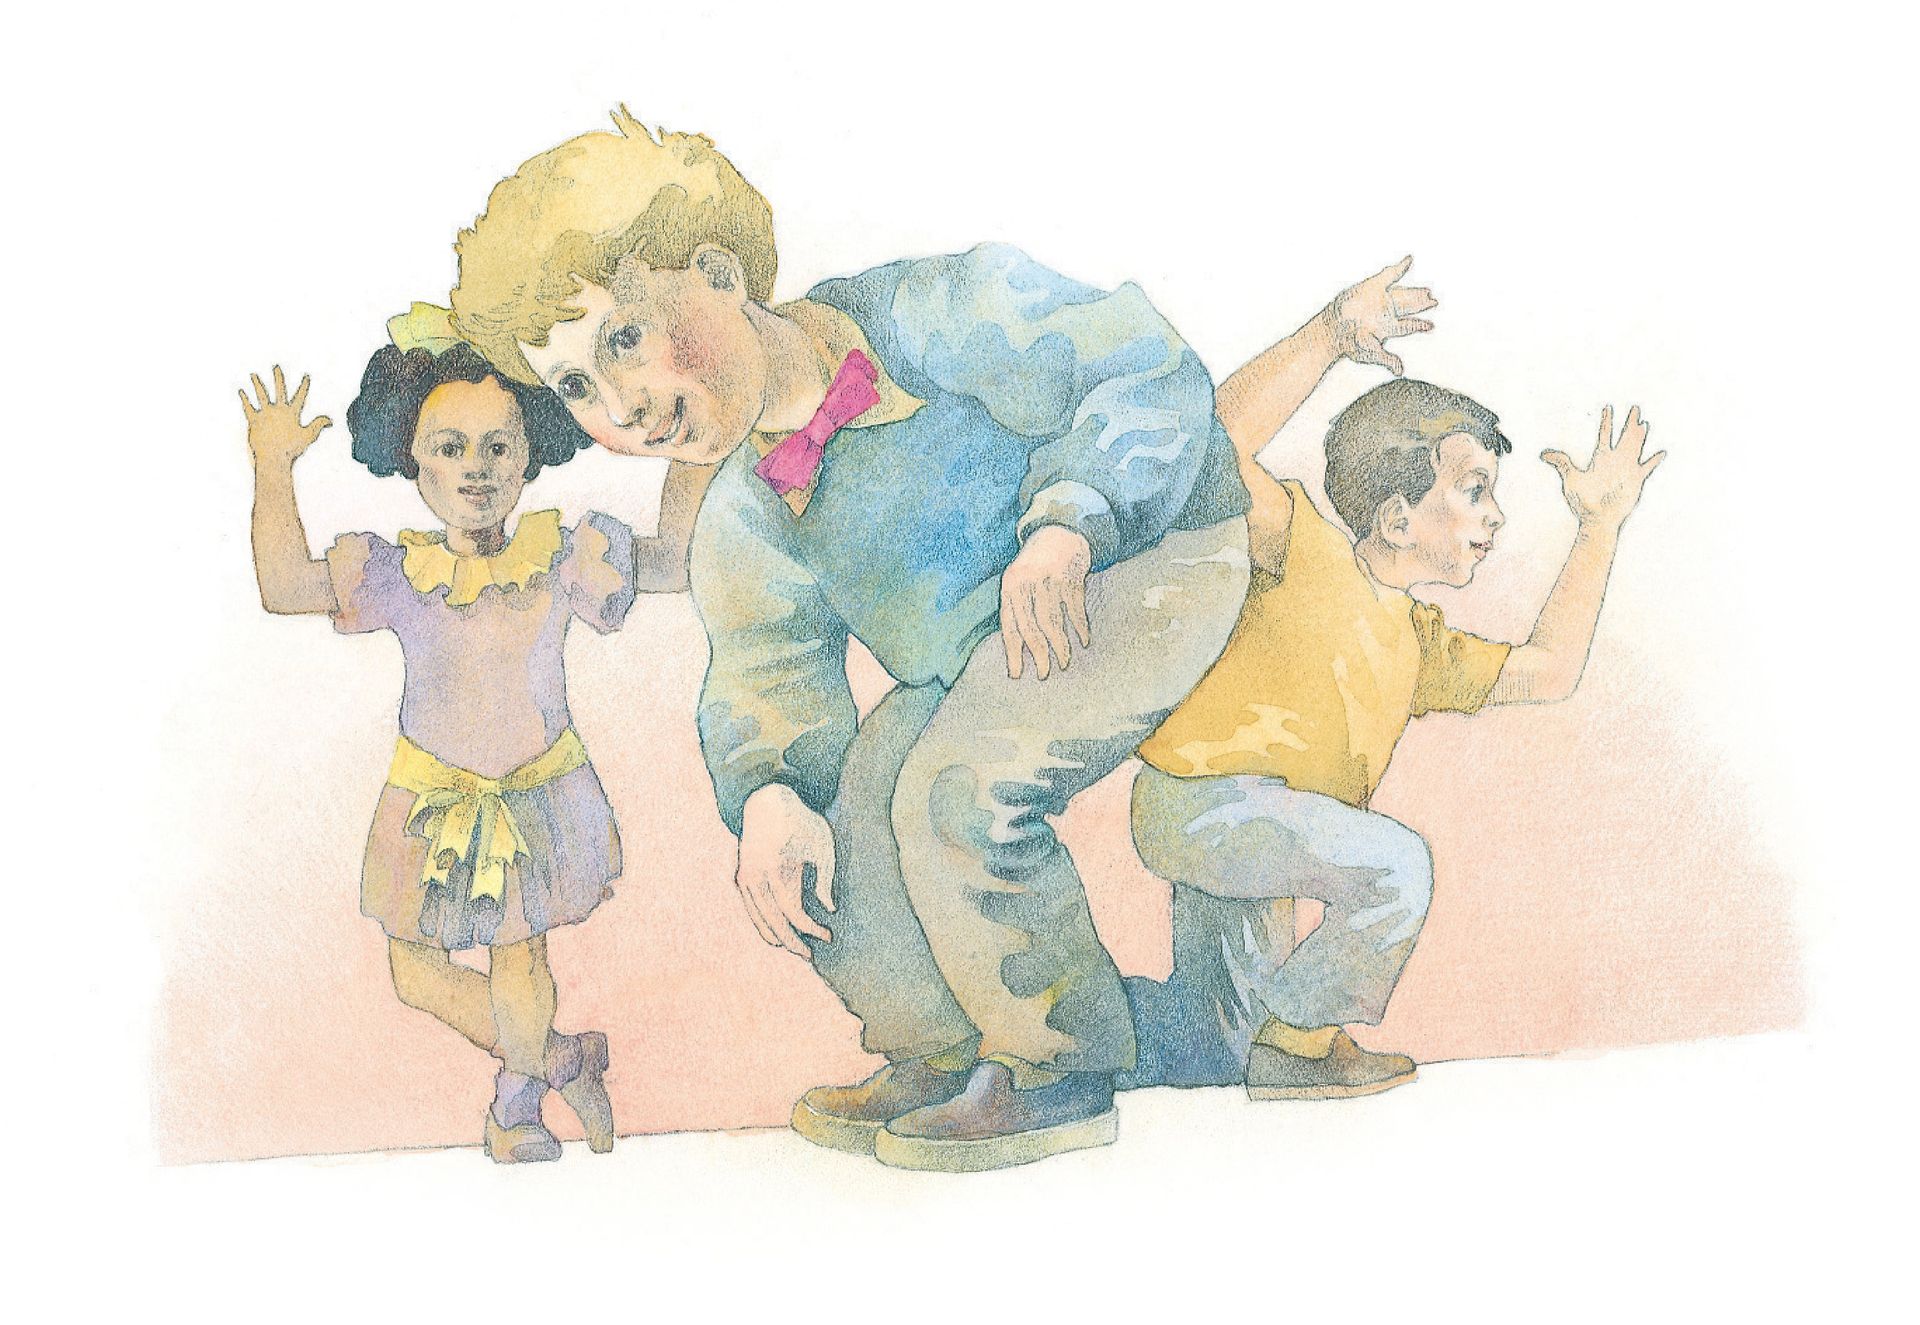 Three children dancing and singing together in Primary. From the Children’s Songbook, page 277, “Hinges”; watercolor illustration by Richard Hull.